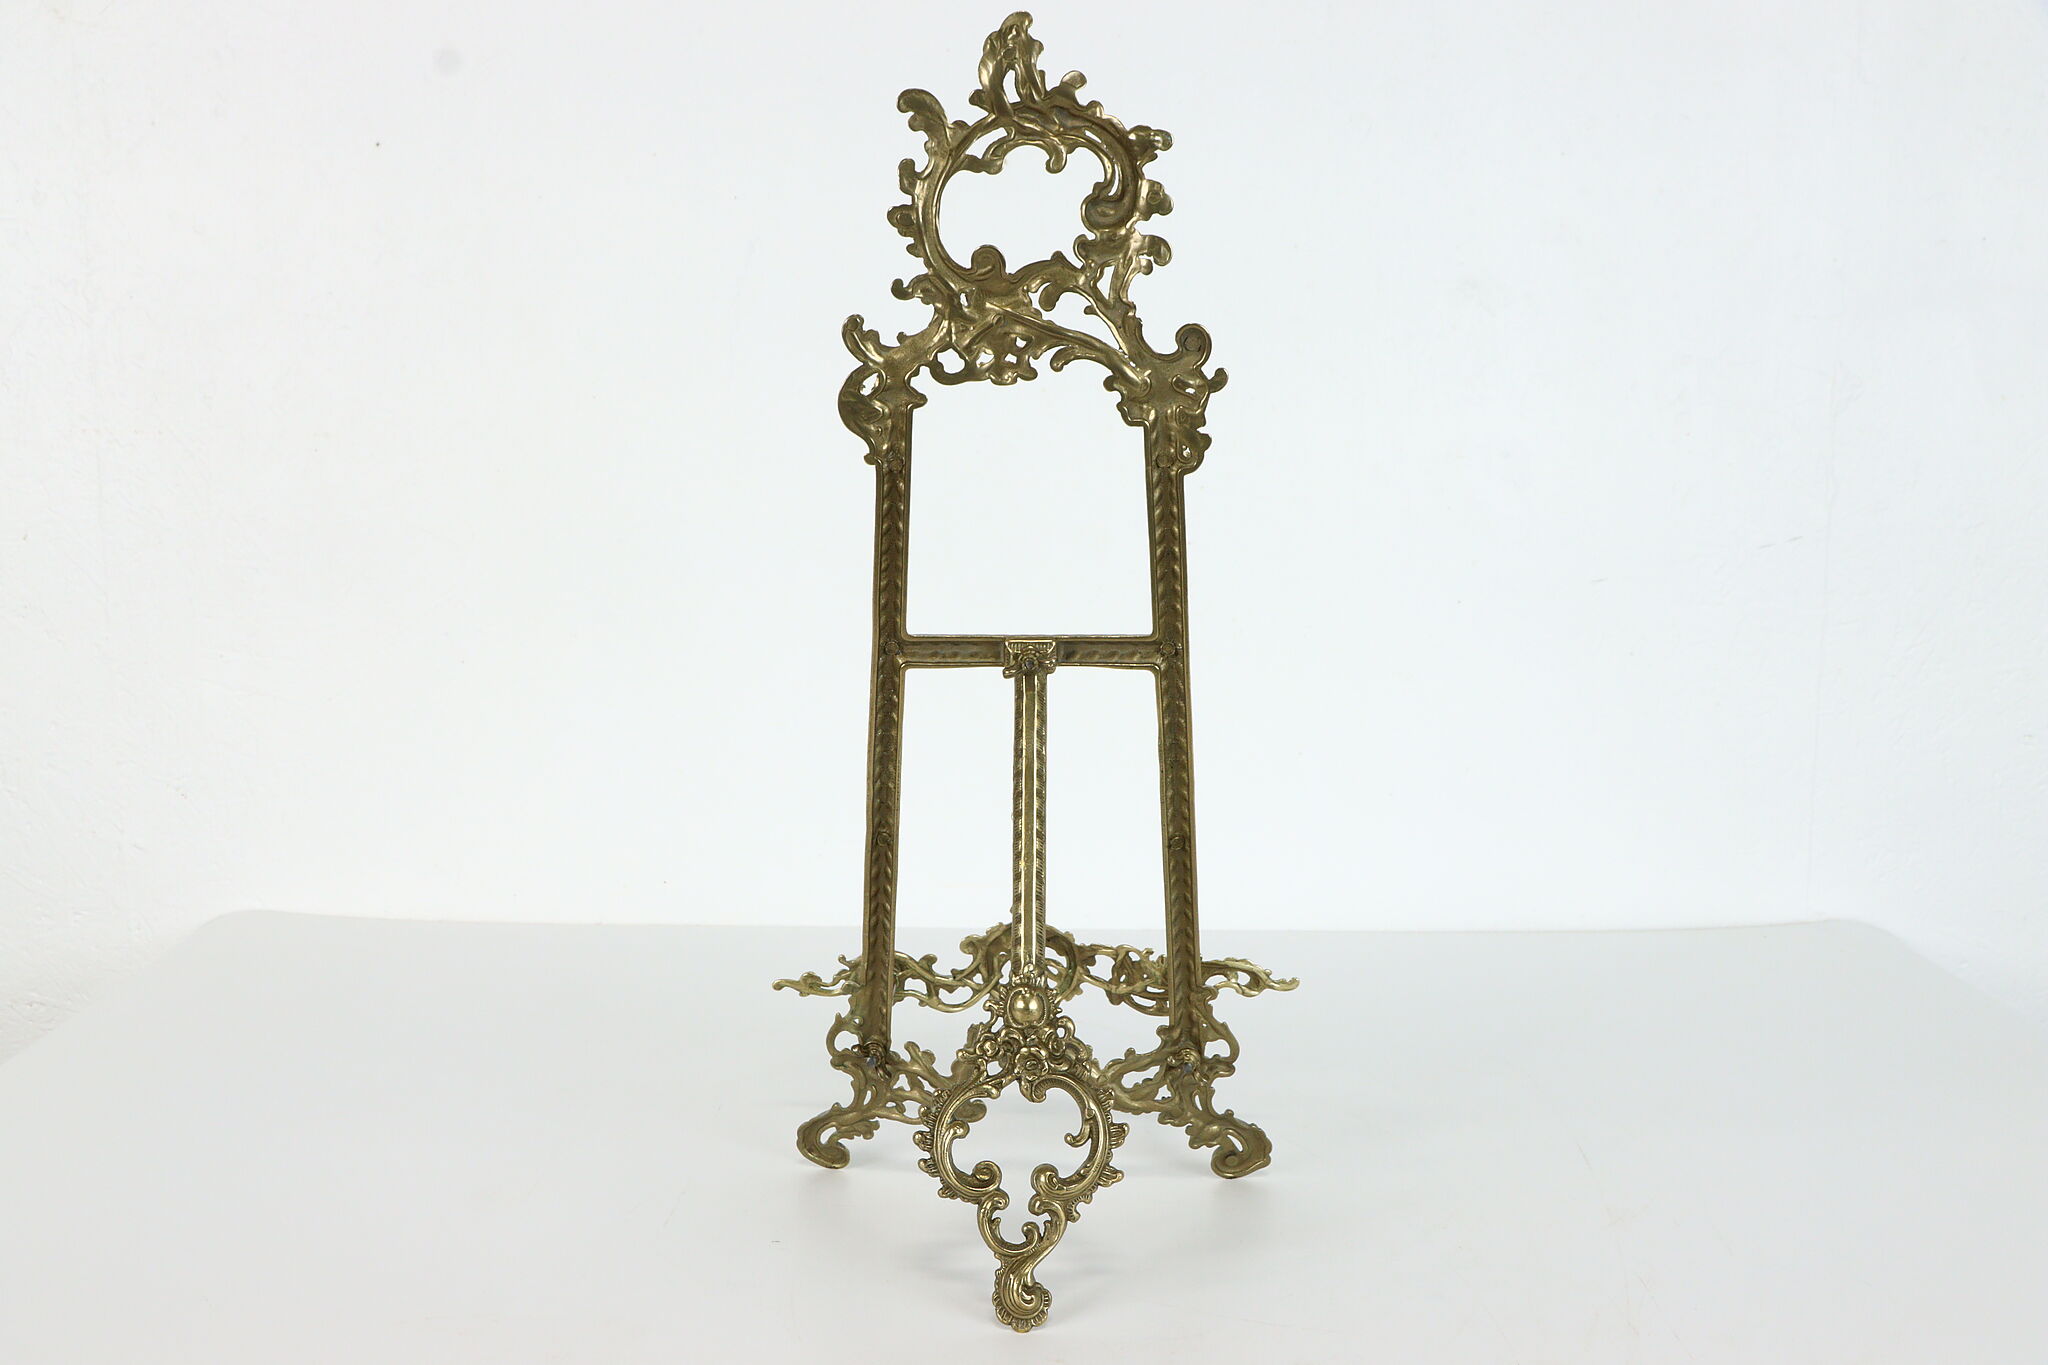 Ornate Brass Easel Vintage UCGC Display Easel Tabletop Display Stand Art  Painting Photo Display Filigree Easel Brass Home Decor 